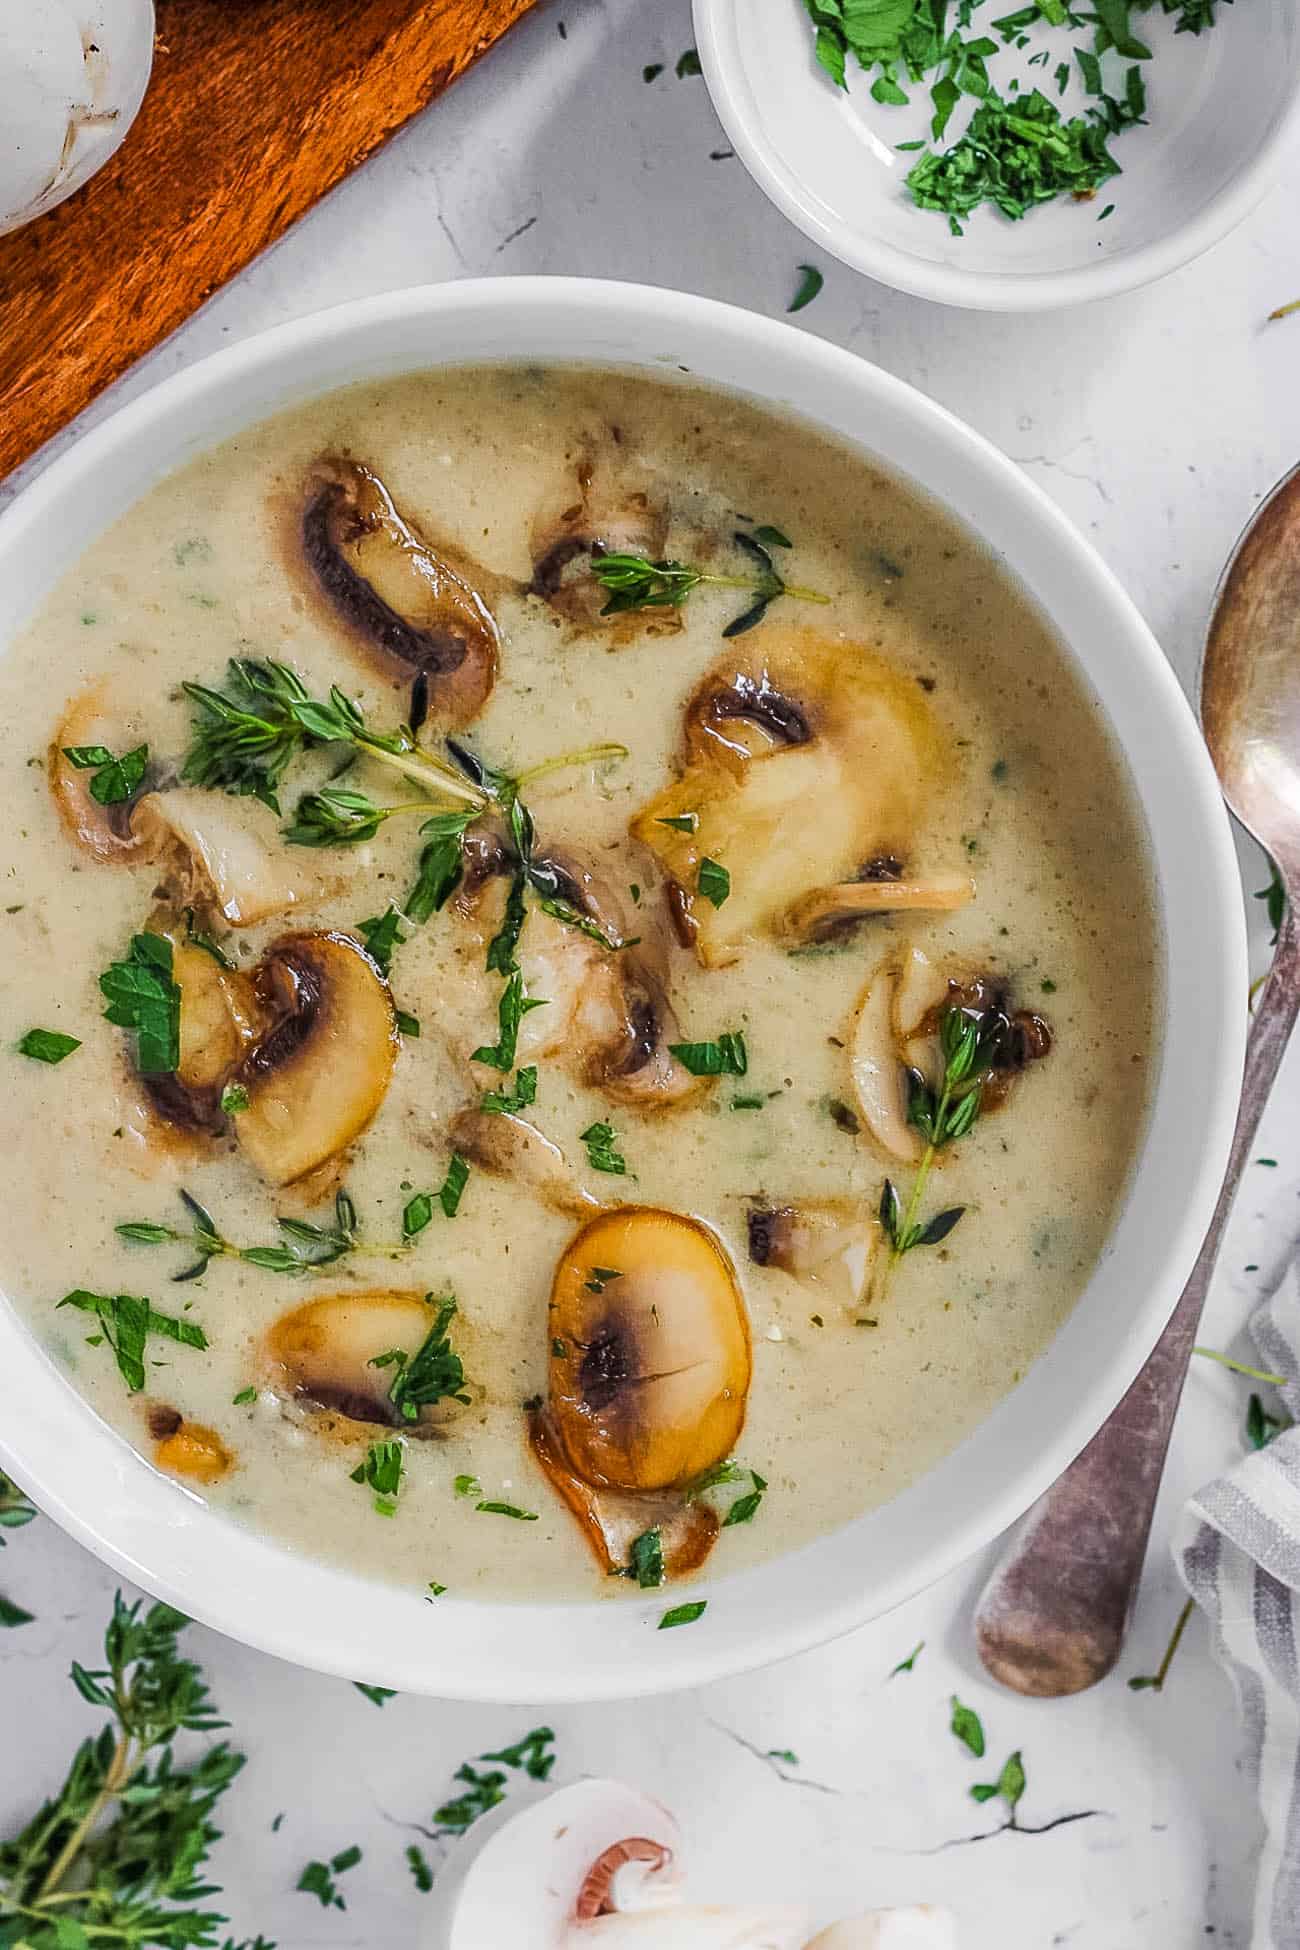 easy homemade healthy mushroom soup without cream in a white bowl